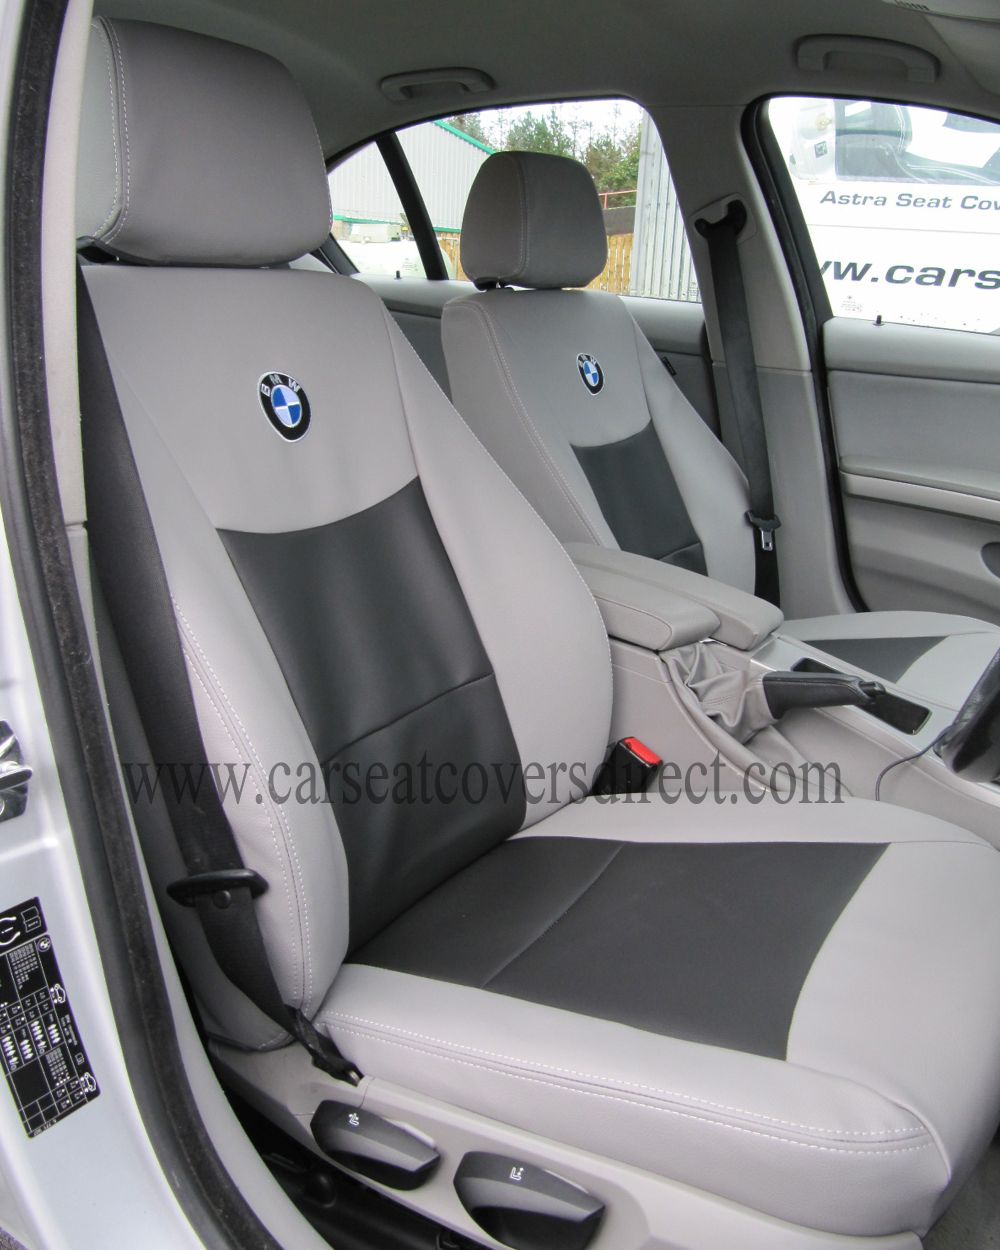 Nissan Juke 2x Front P4 Seat Covers Seat Cover Car